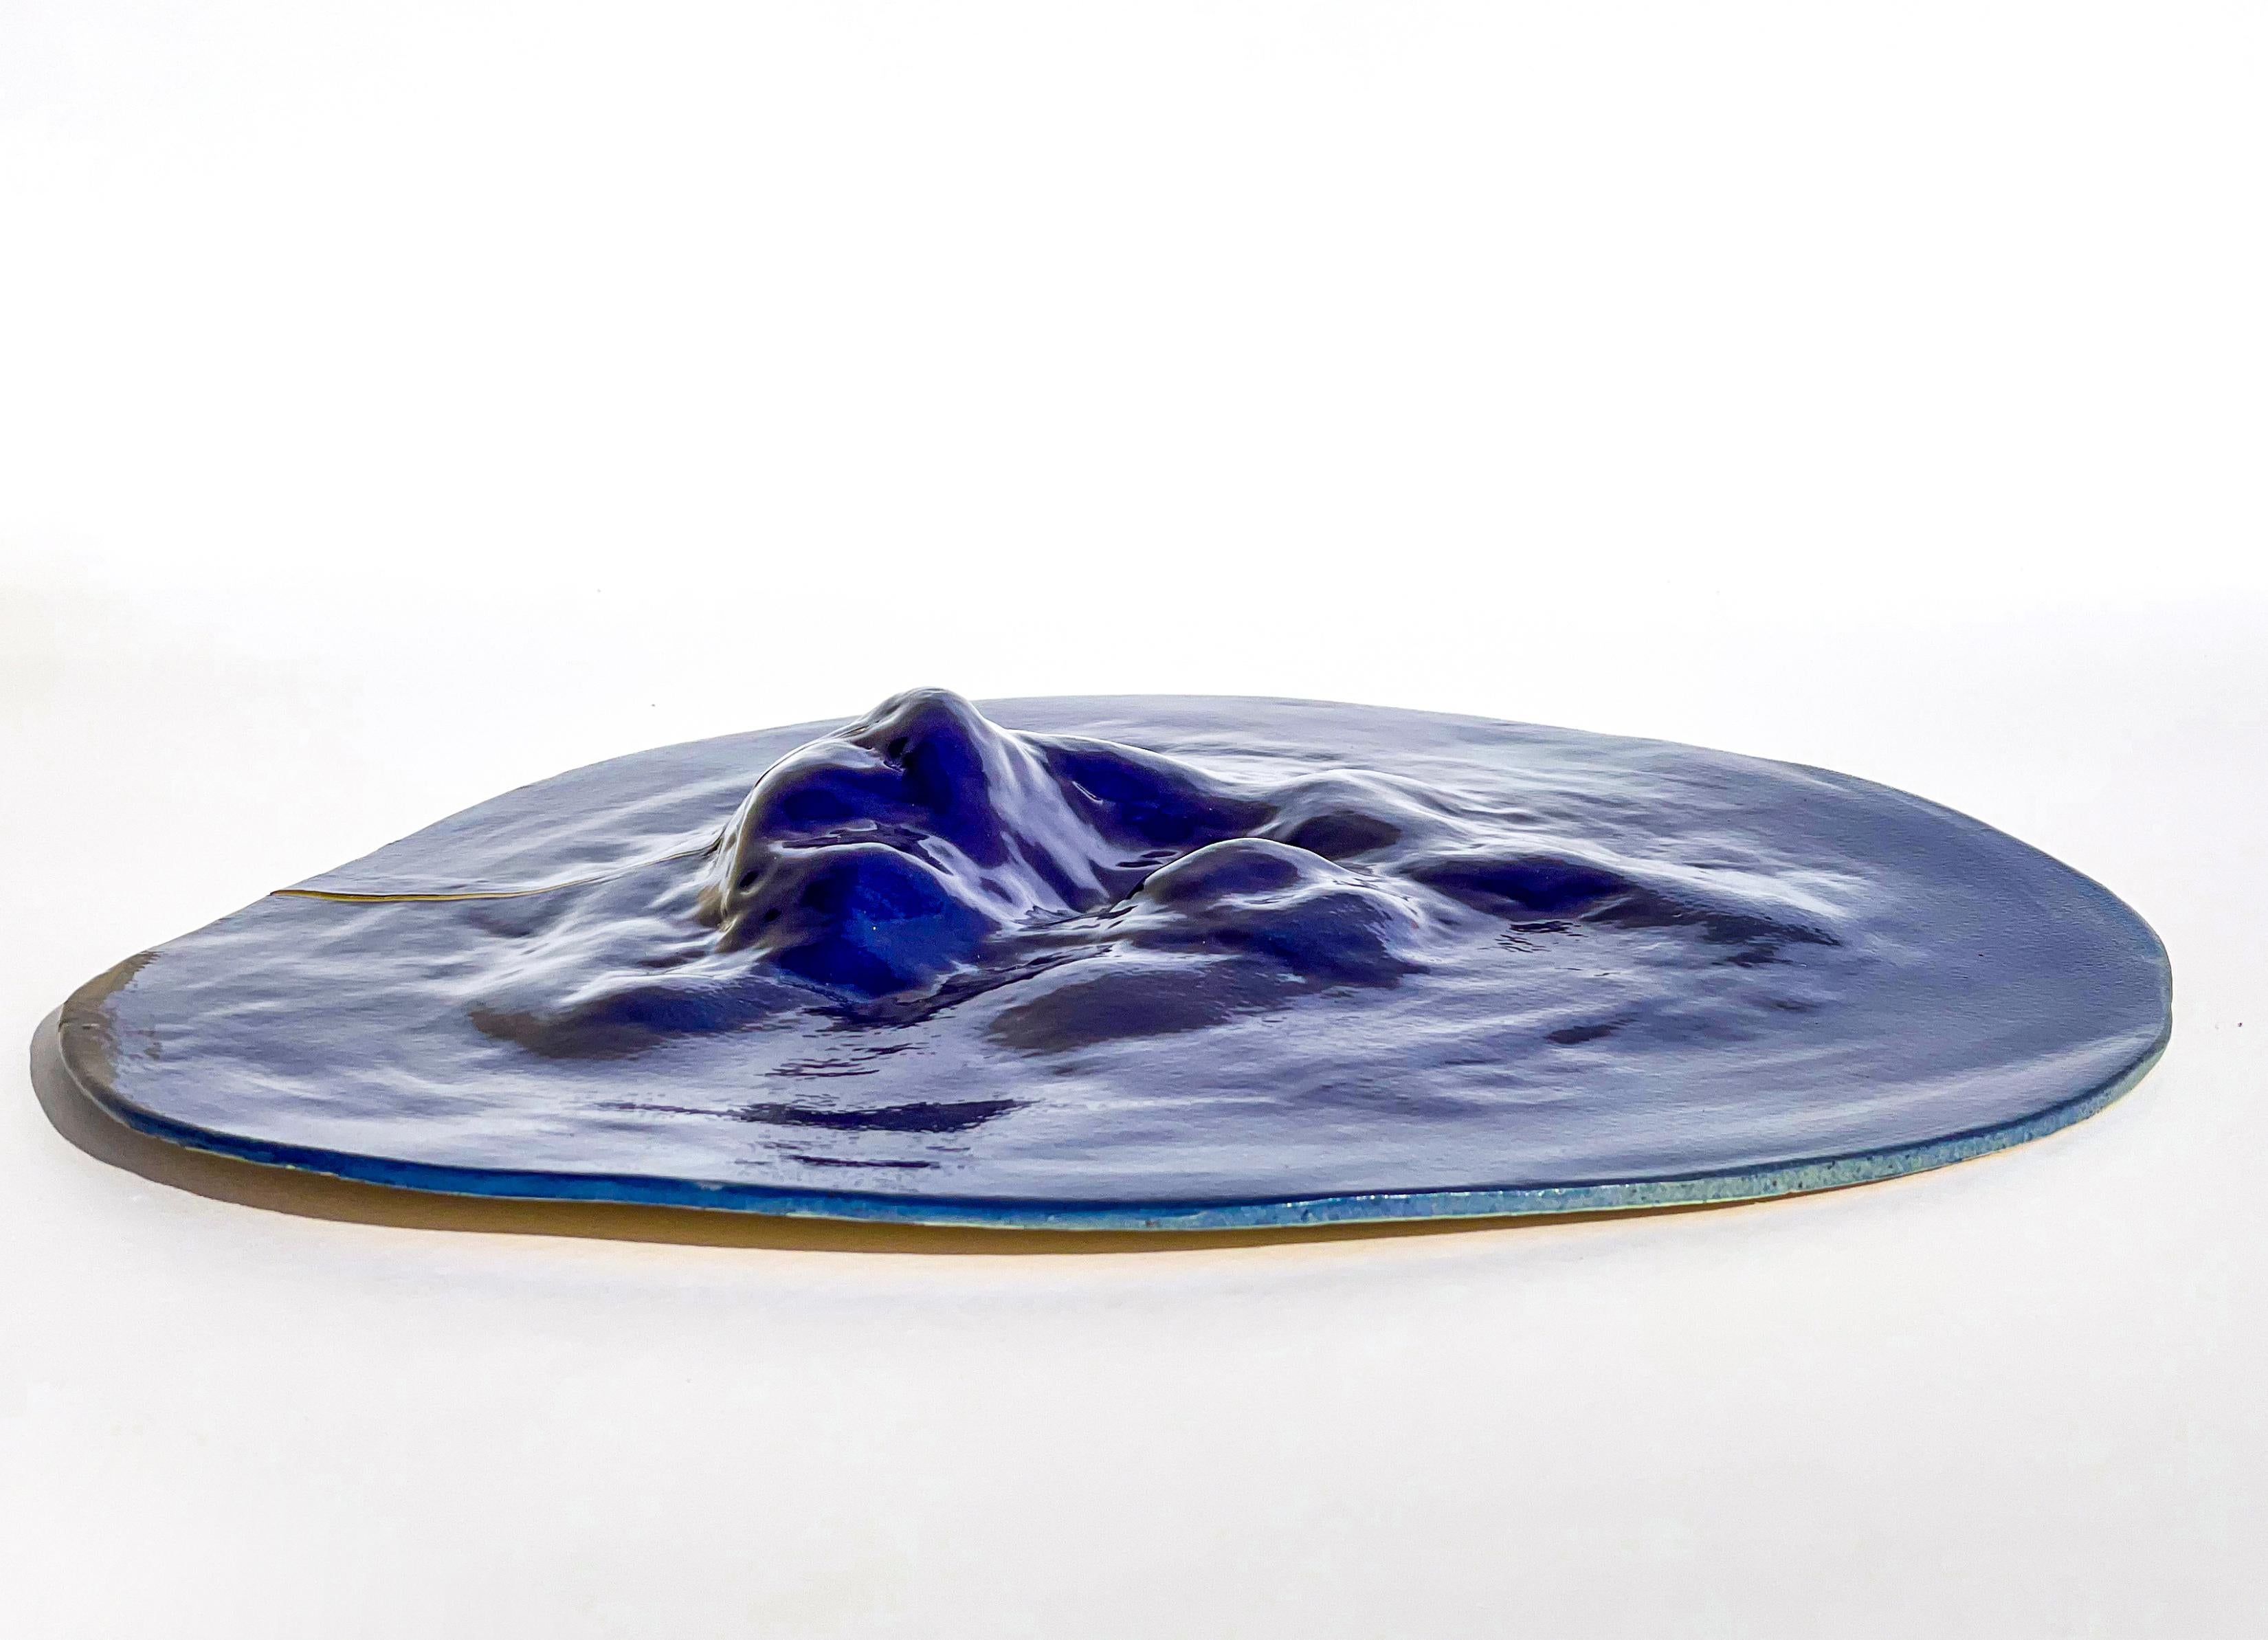 Gongshi Plates

Hand made Unique Undulating Form Plates, Objet d'Art in cobalt blue.

These sculptural plates are taking inspiration from the Chinese ‘gongshi’
‘Gongshi (Chinese: ??), also known as scholar's rocks, are naturally occurring or